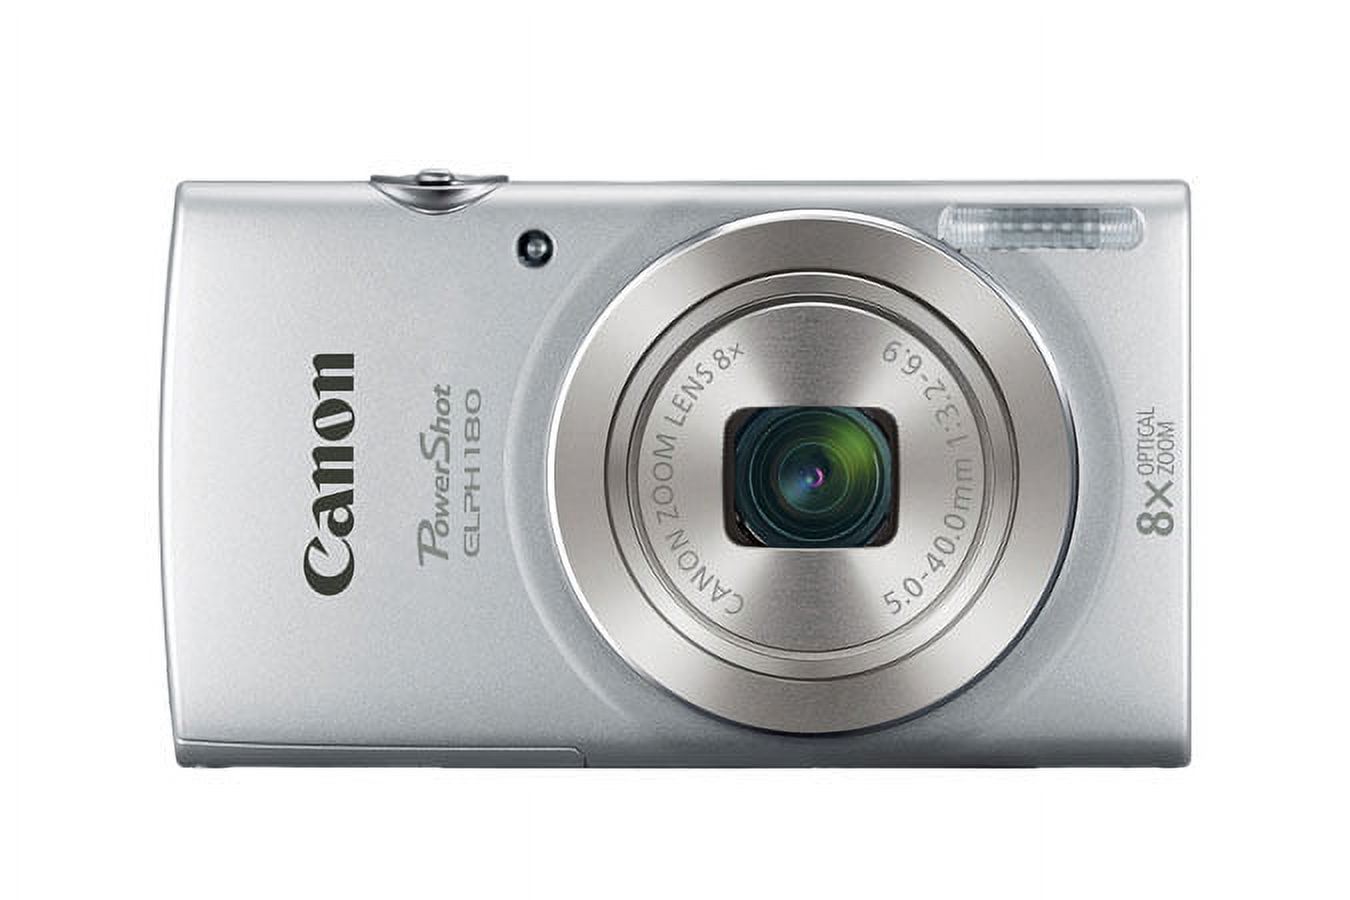 Canon Powershot Elph 180 Silver Camera - image 2 of 8